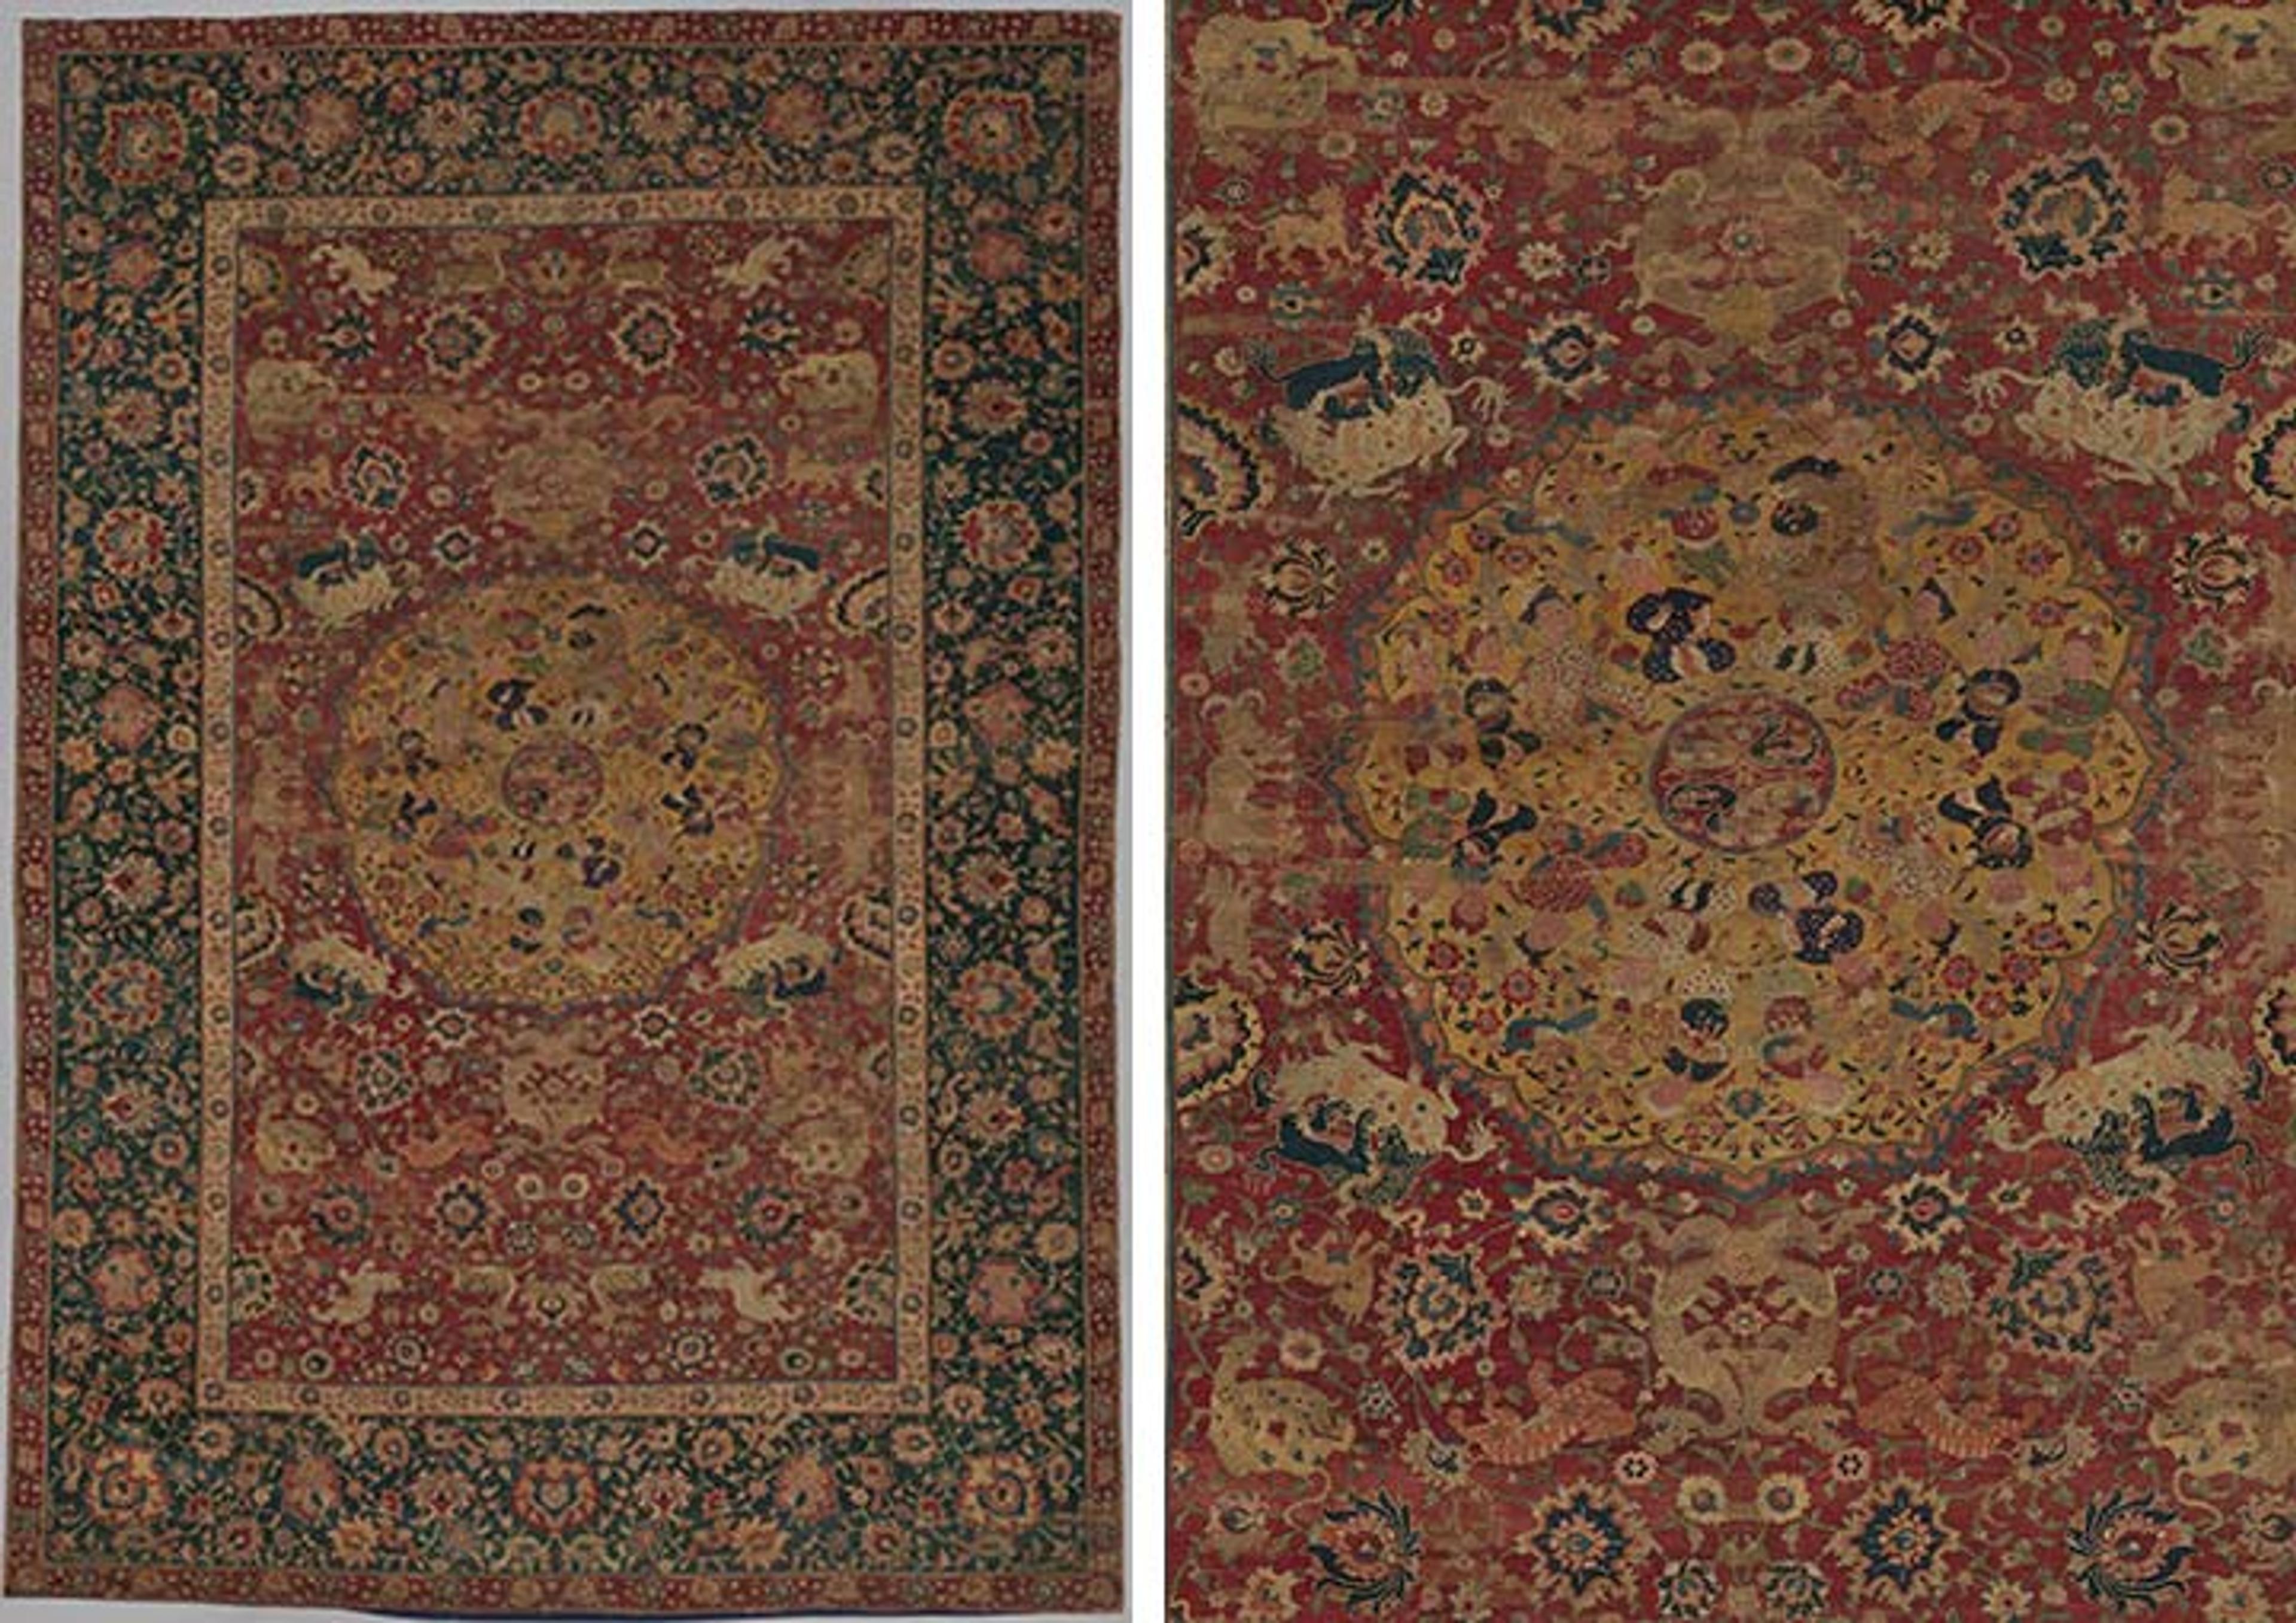 Carpets for Kings: Six Masterpieces of Iranian Weaving